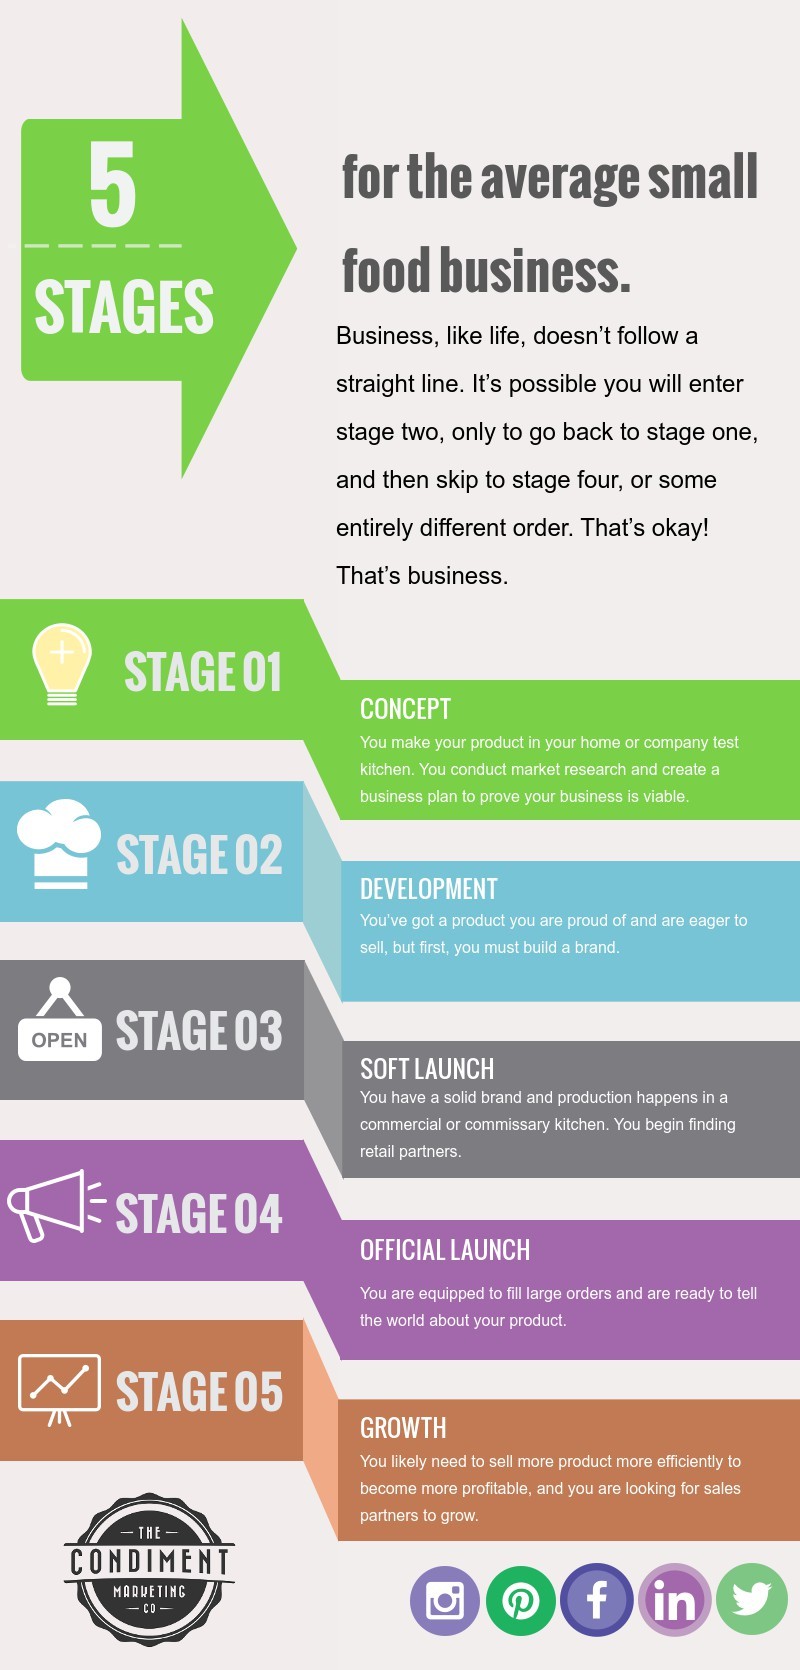 food business stages infographic